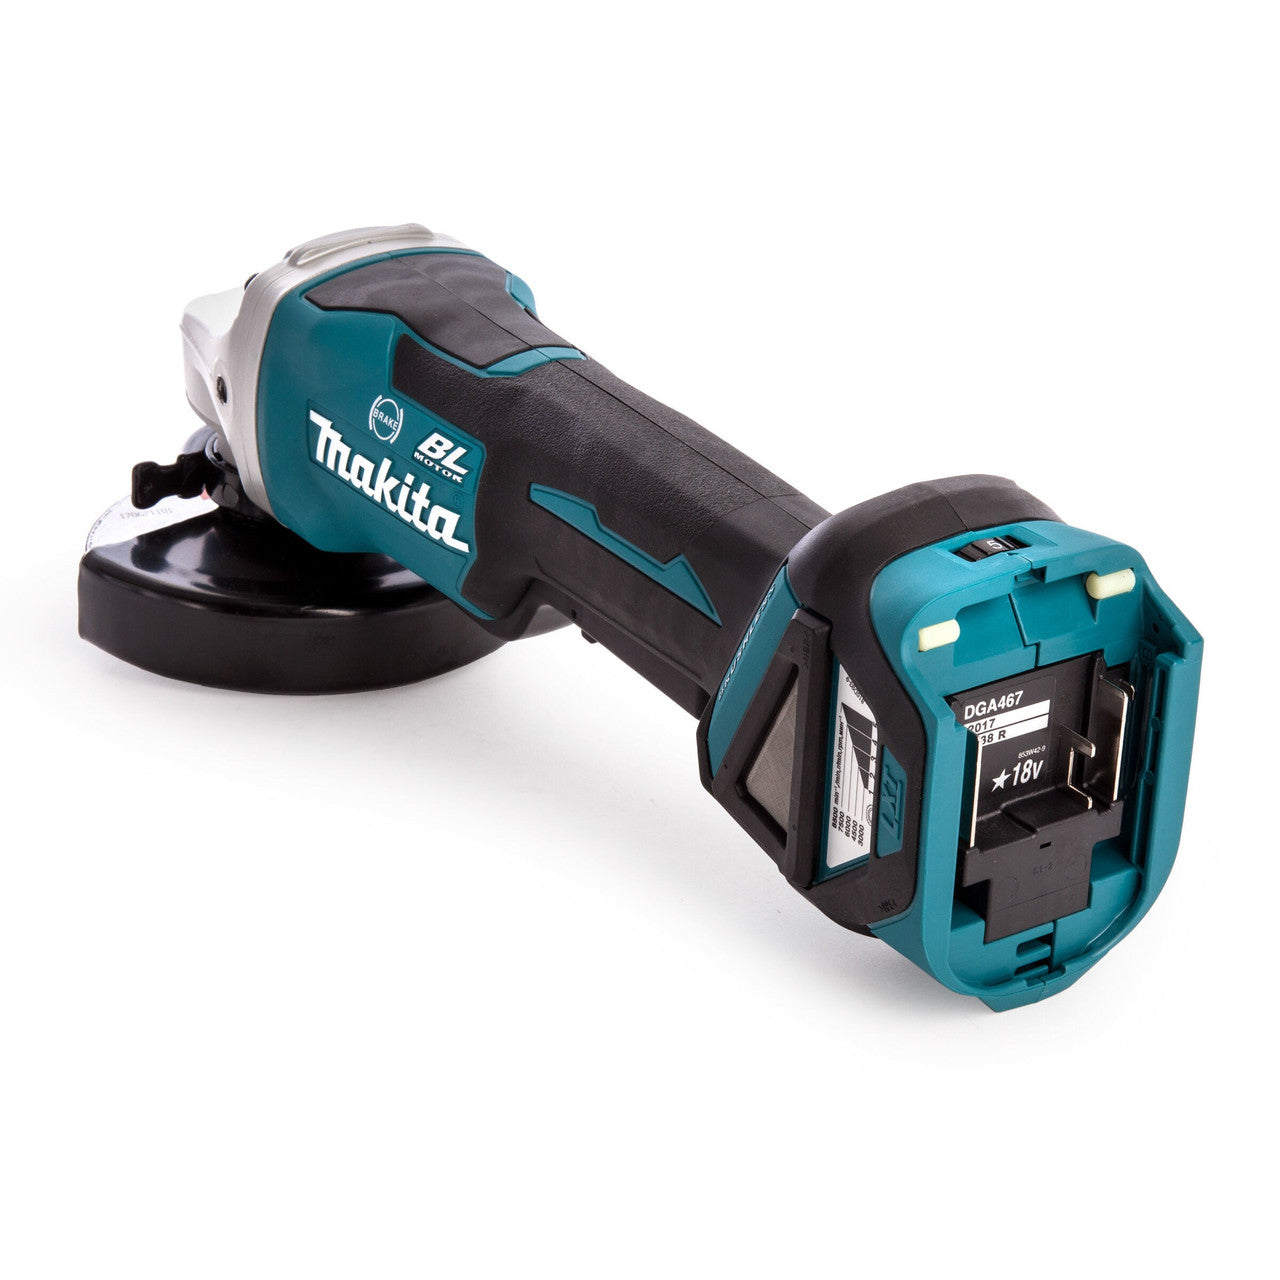 Makita DGA467Z 18V LXT 4.5 inch/115mm Brushless Angle Grinder (Body Only)